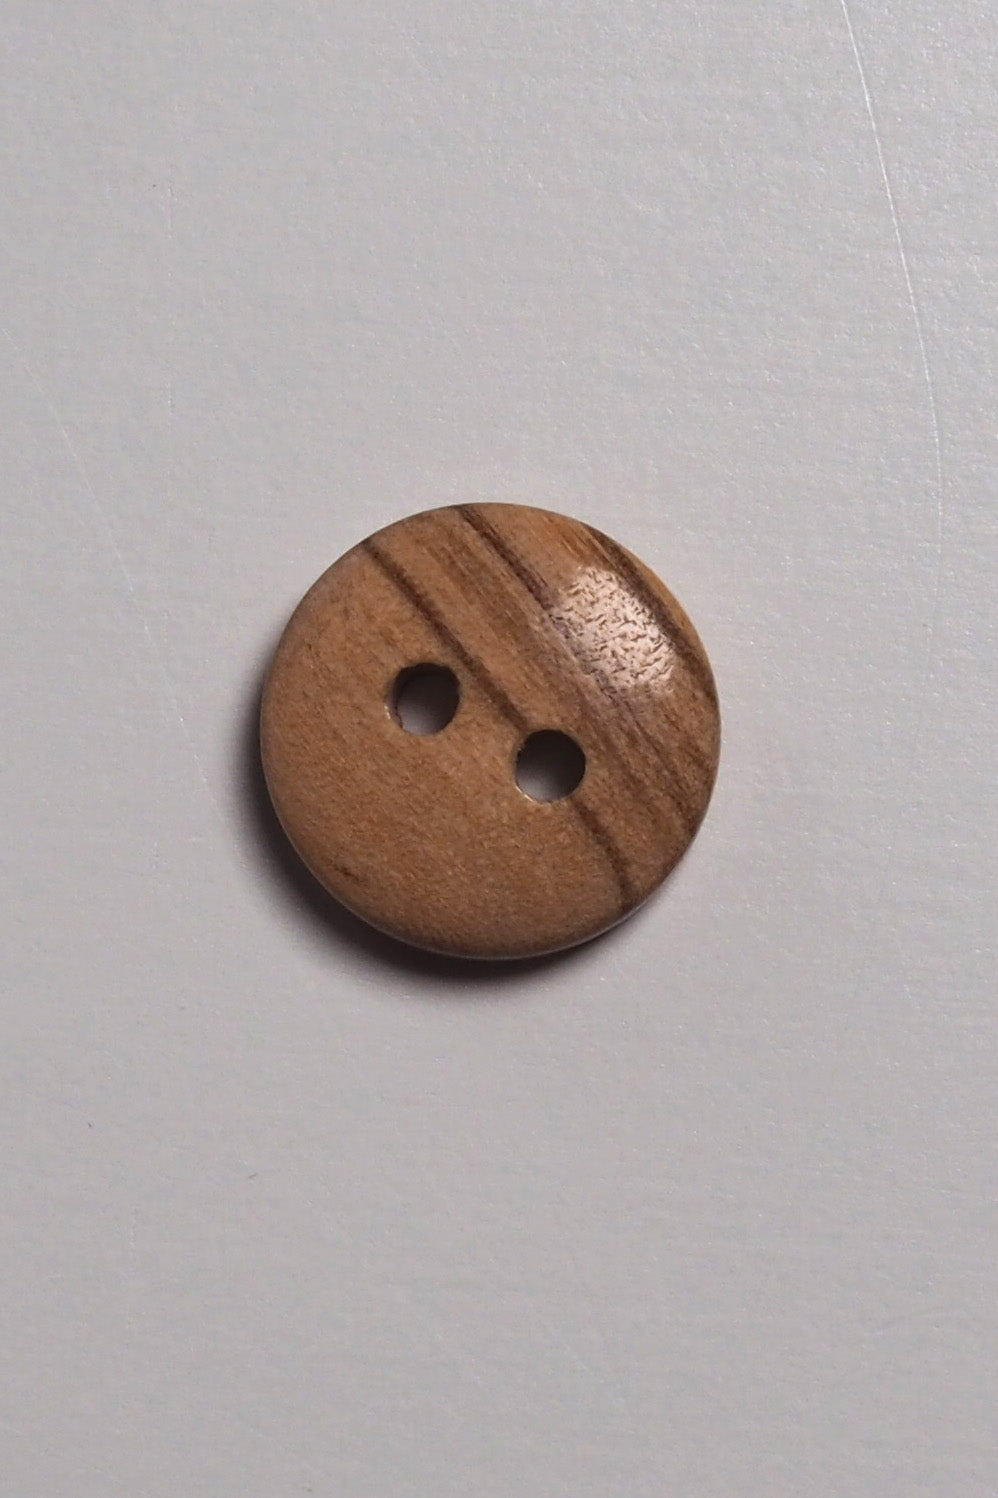 SMALL WOODEN BUTTON